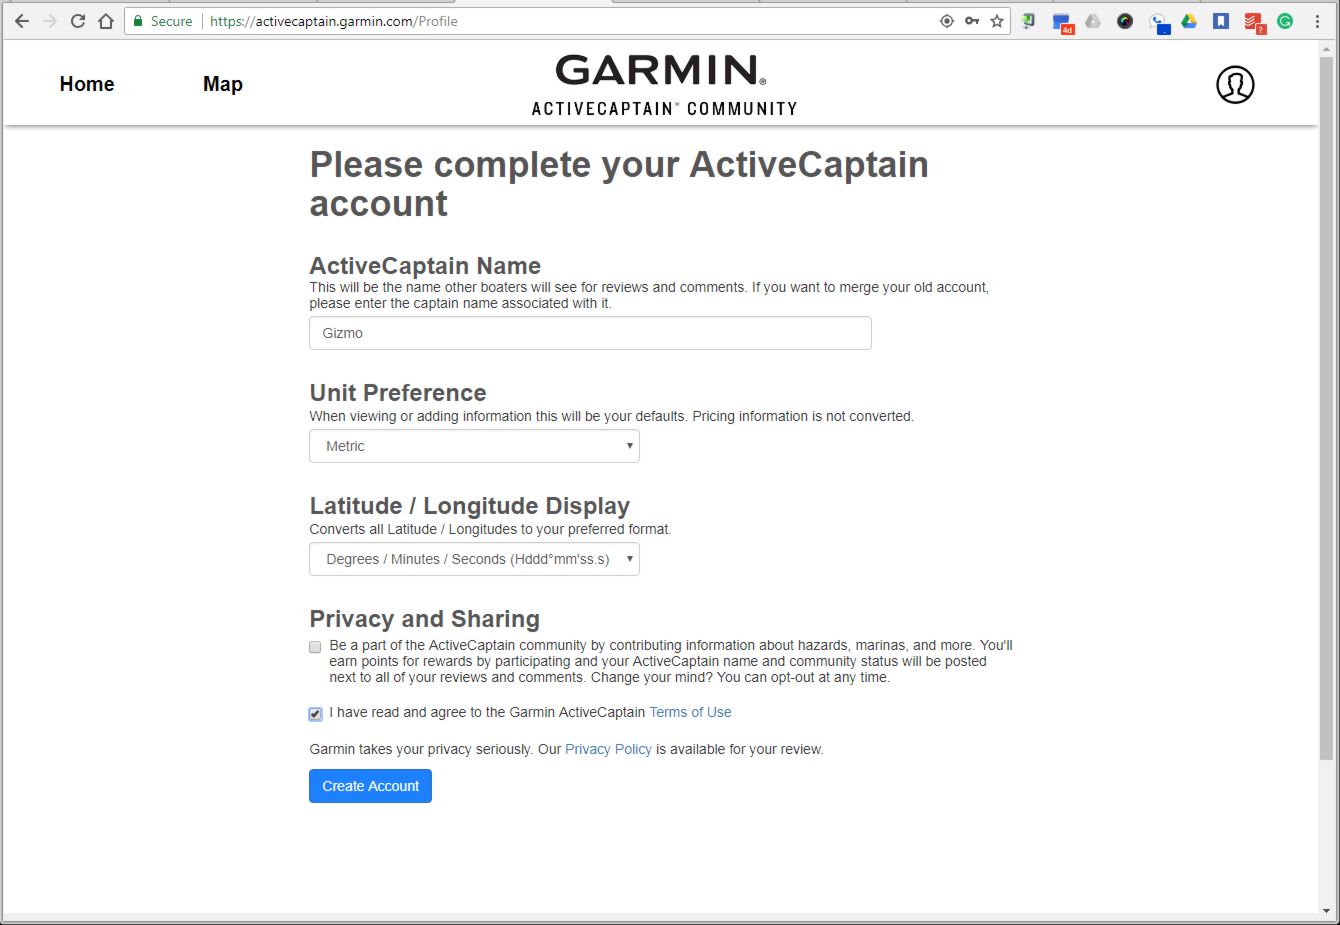 Kyst vogn morder Garmin's new ActiveCaptain Community site, what's good and what's not? -  Panbo